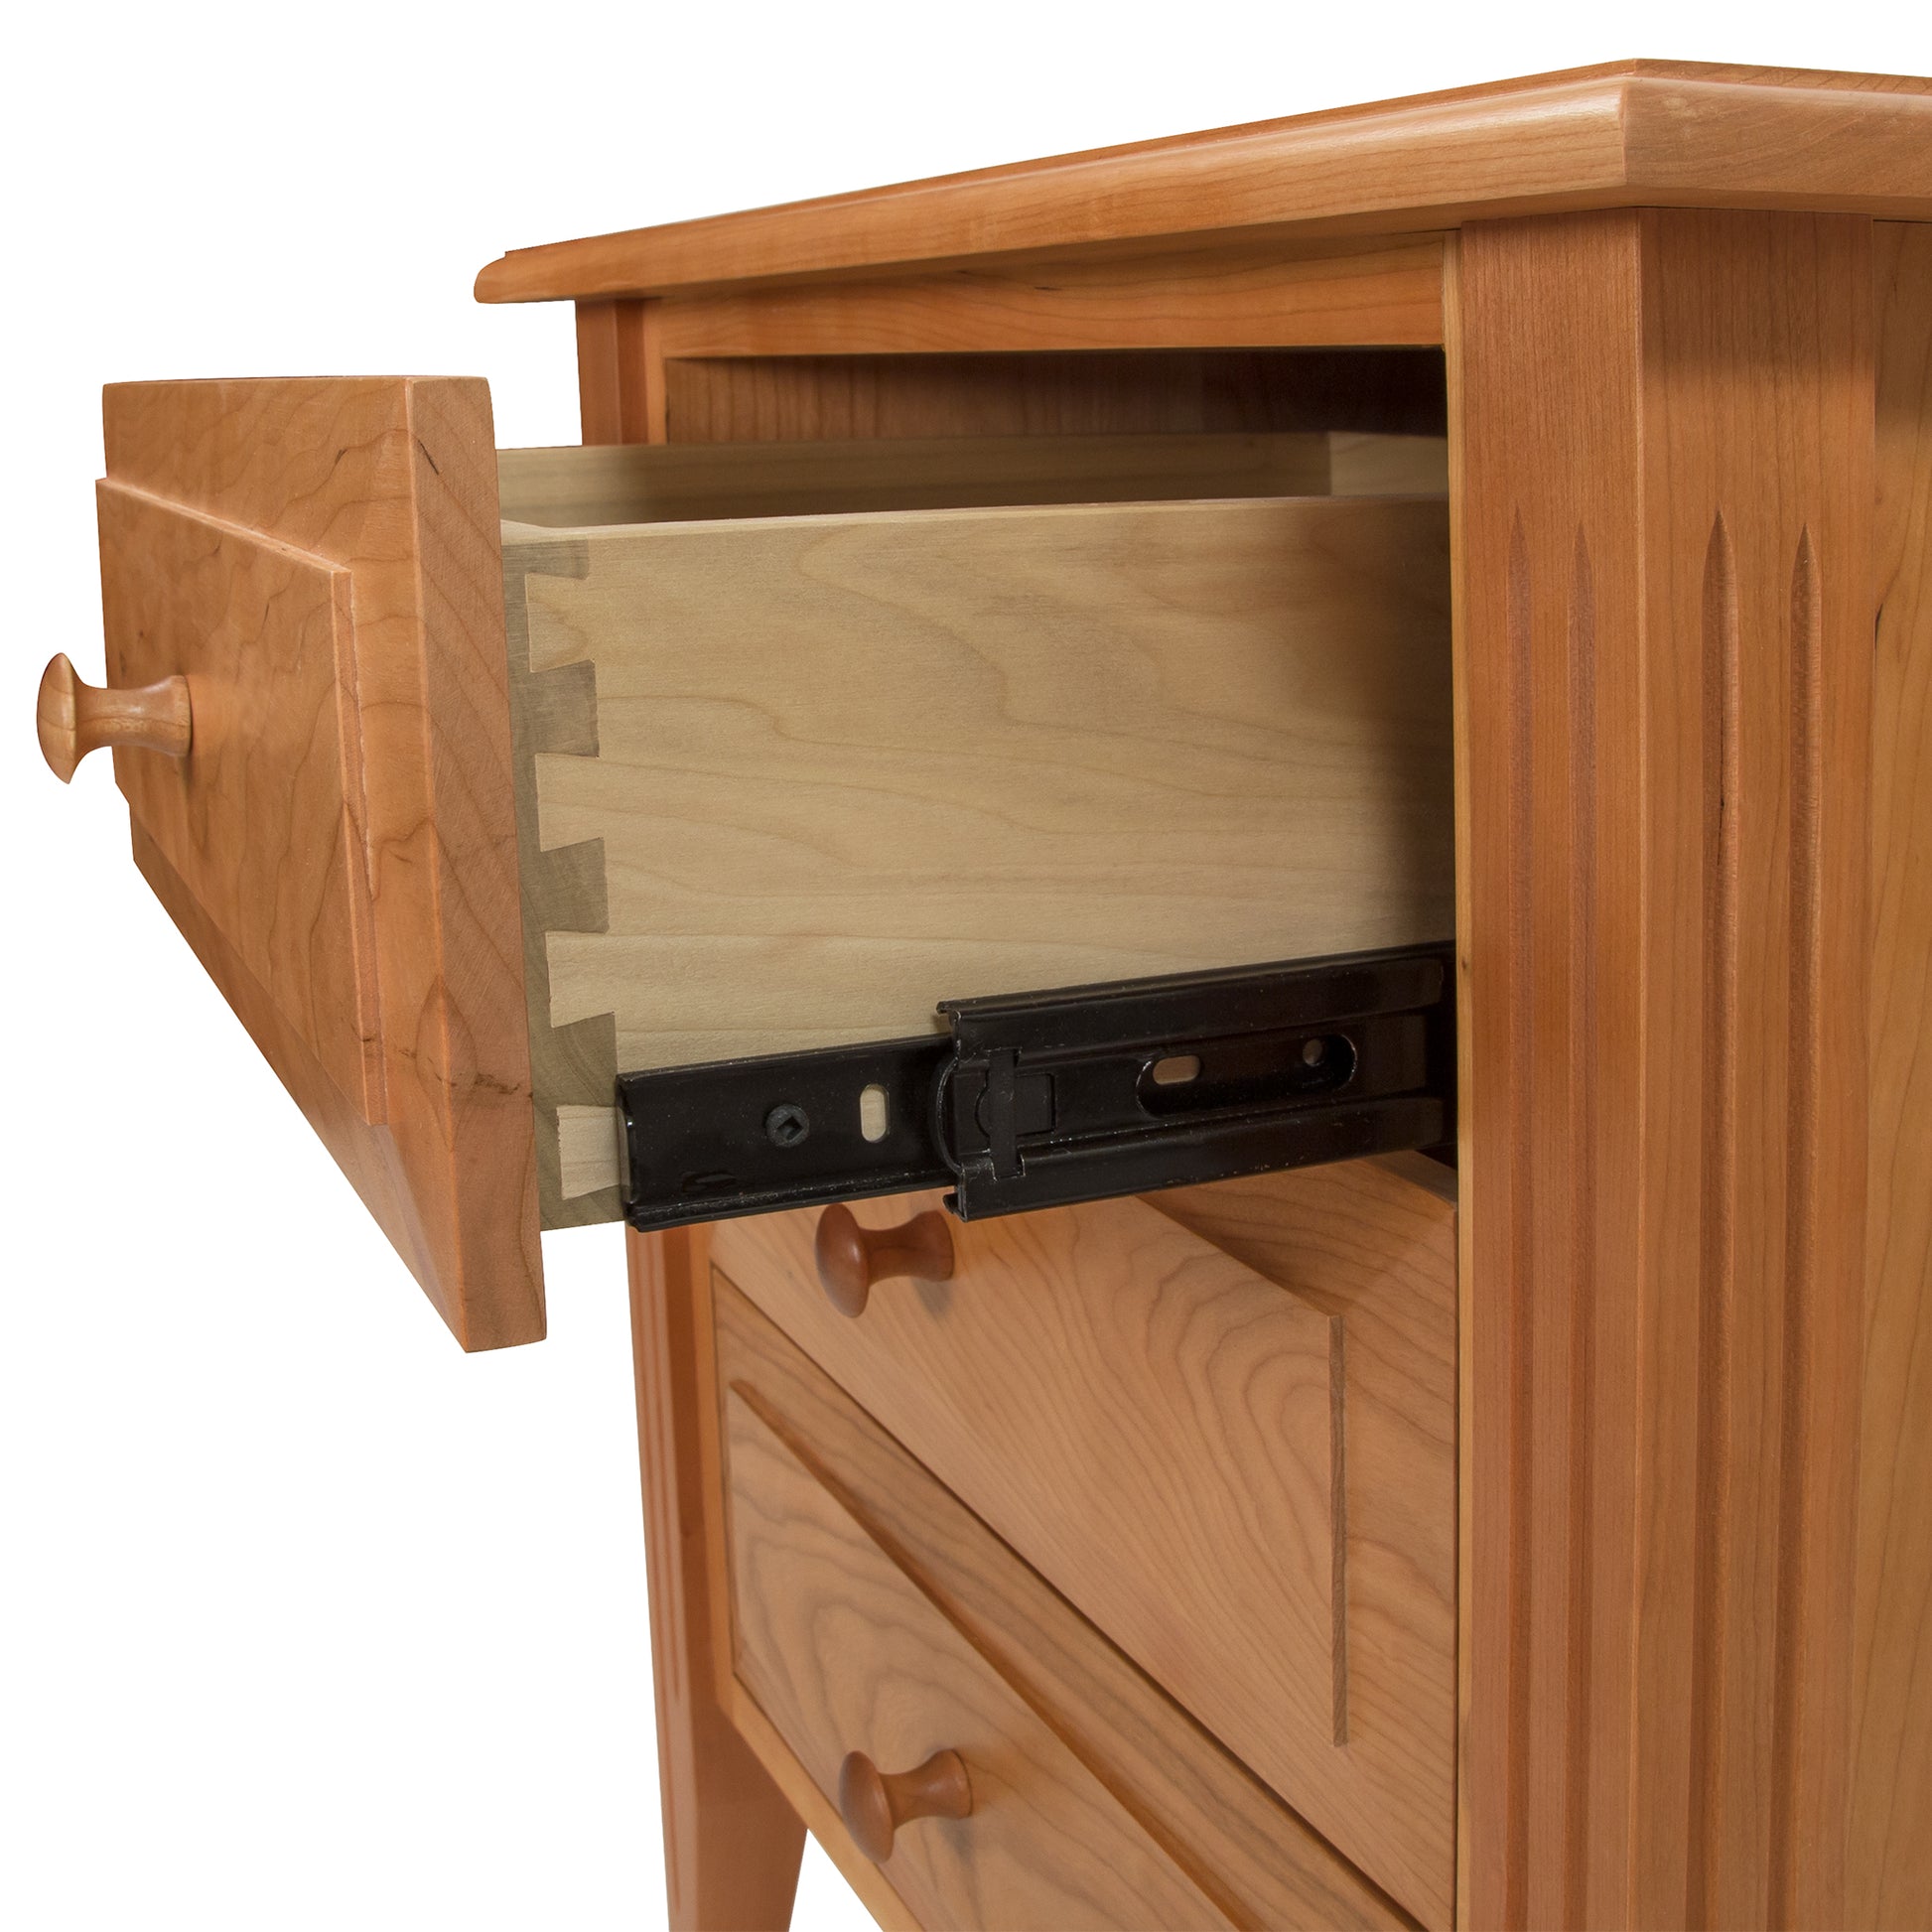 A Renfrew Shaker 3-Drawer Nightstand by Lyndon Furniture with an open drawer.